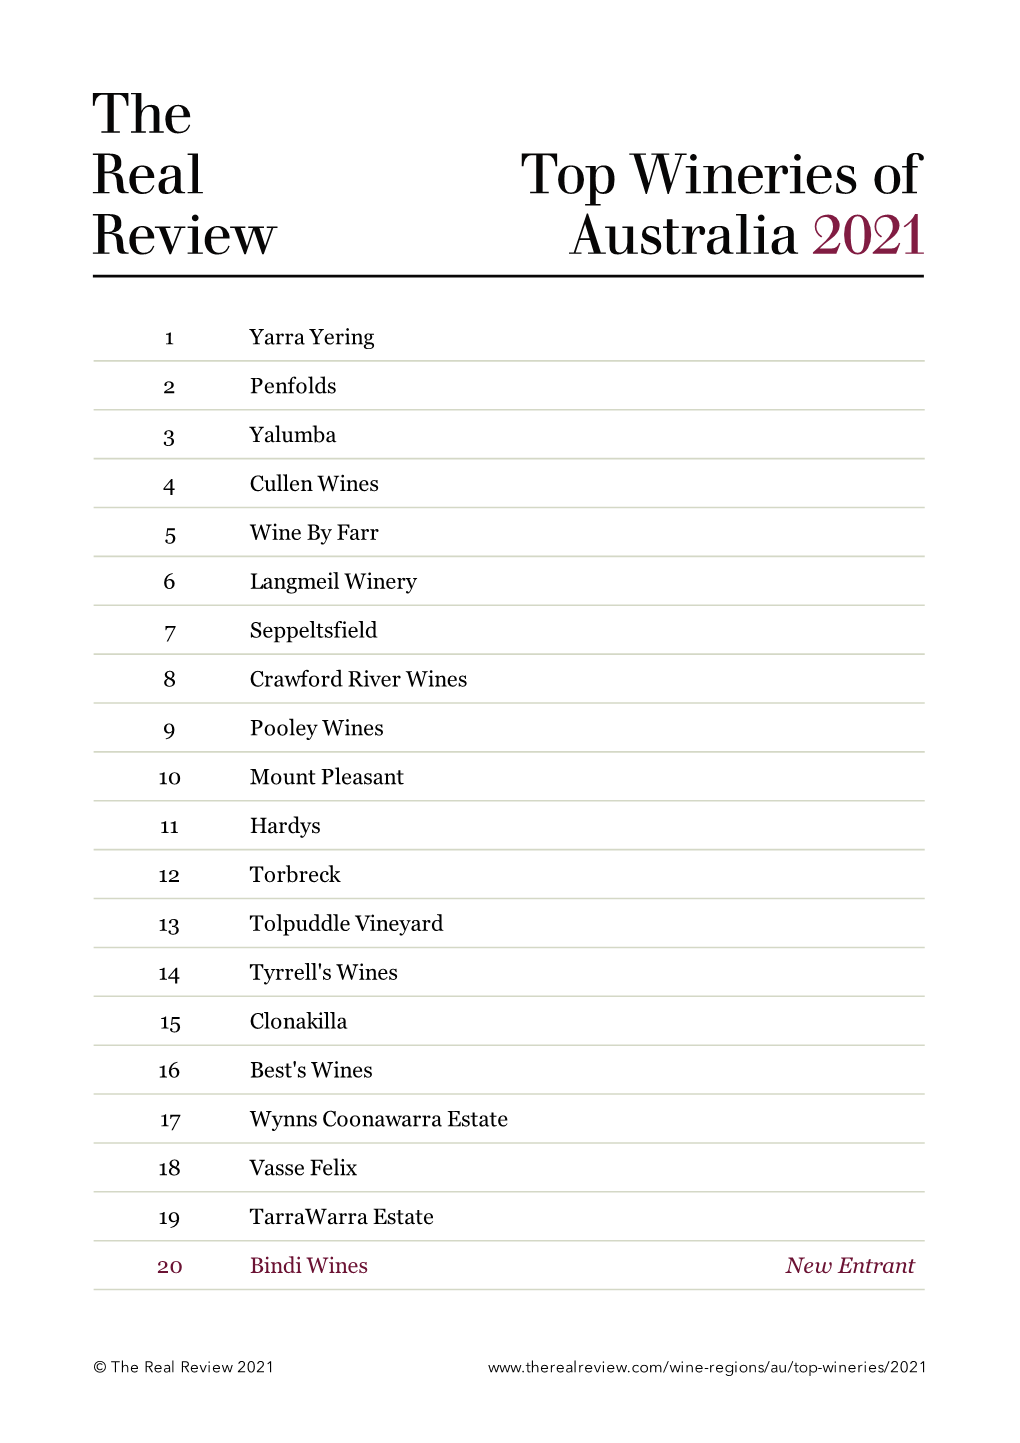 The Real Review Top Wineries of Australia 2021